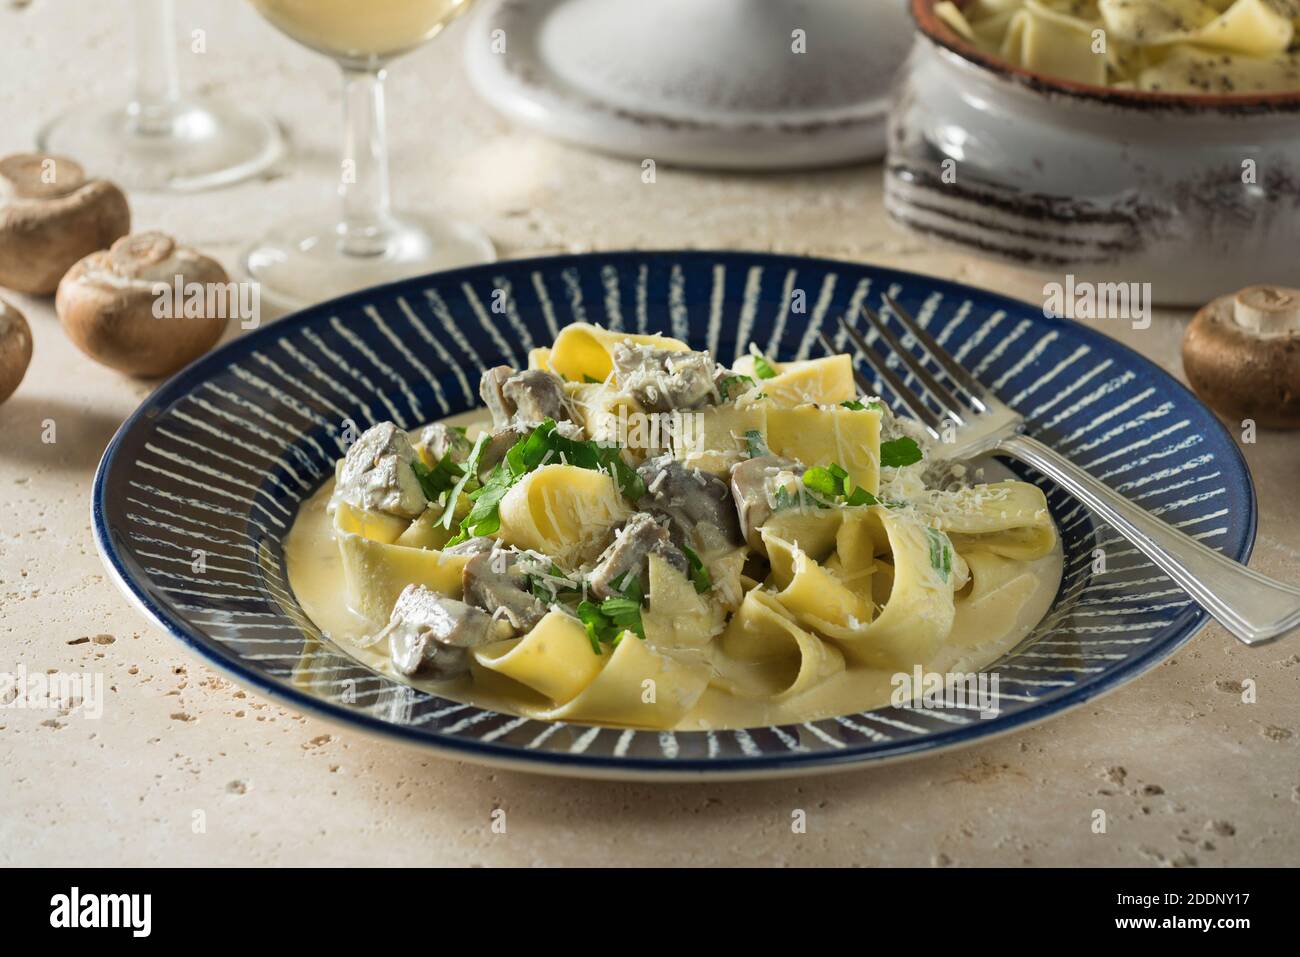 Pasta ai funghi. Pappardelle with mushrooms. Italy Food Stock Photo